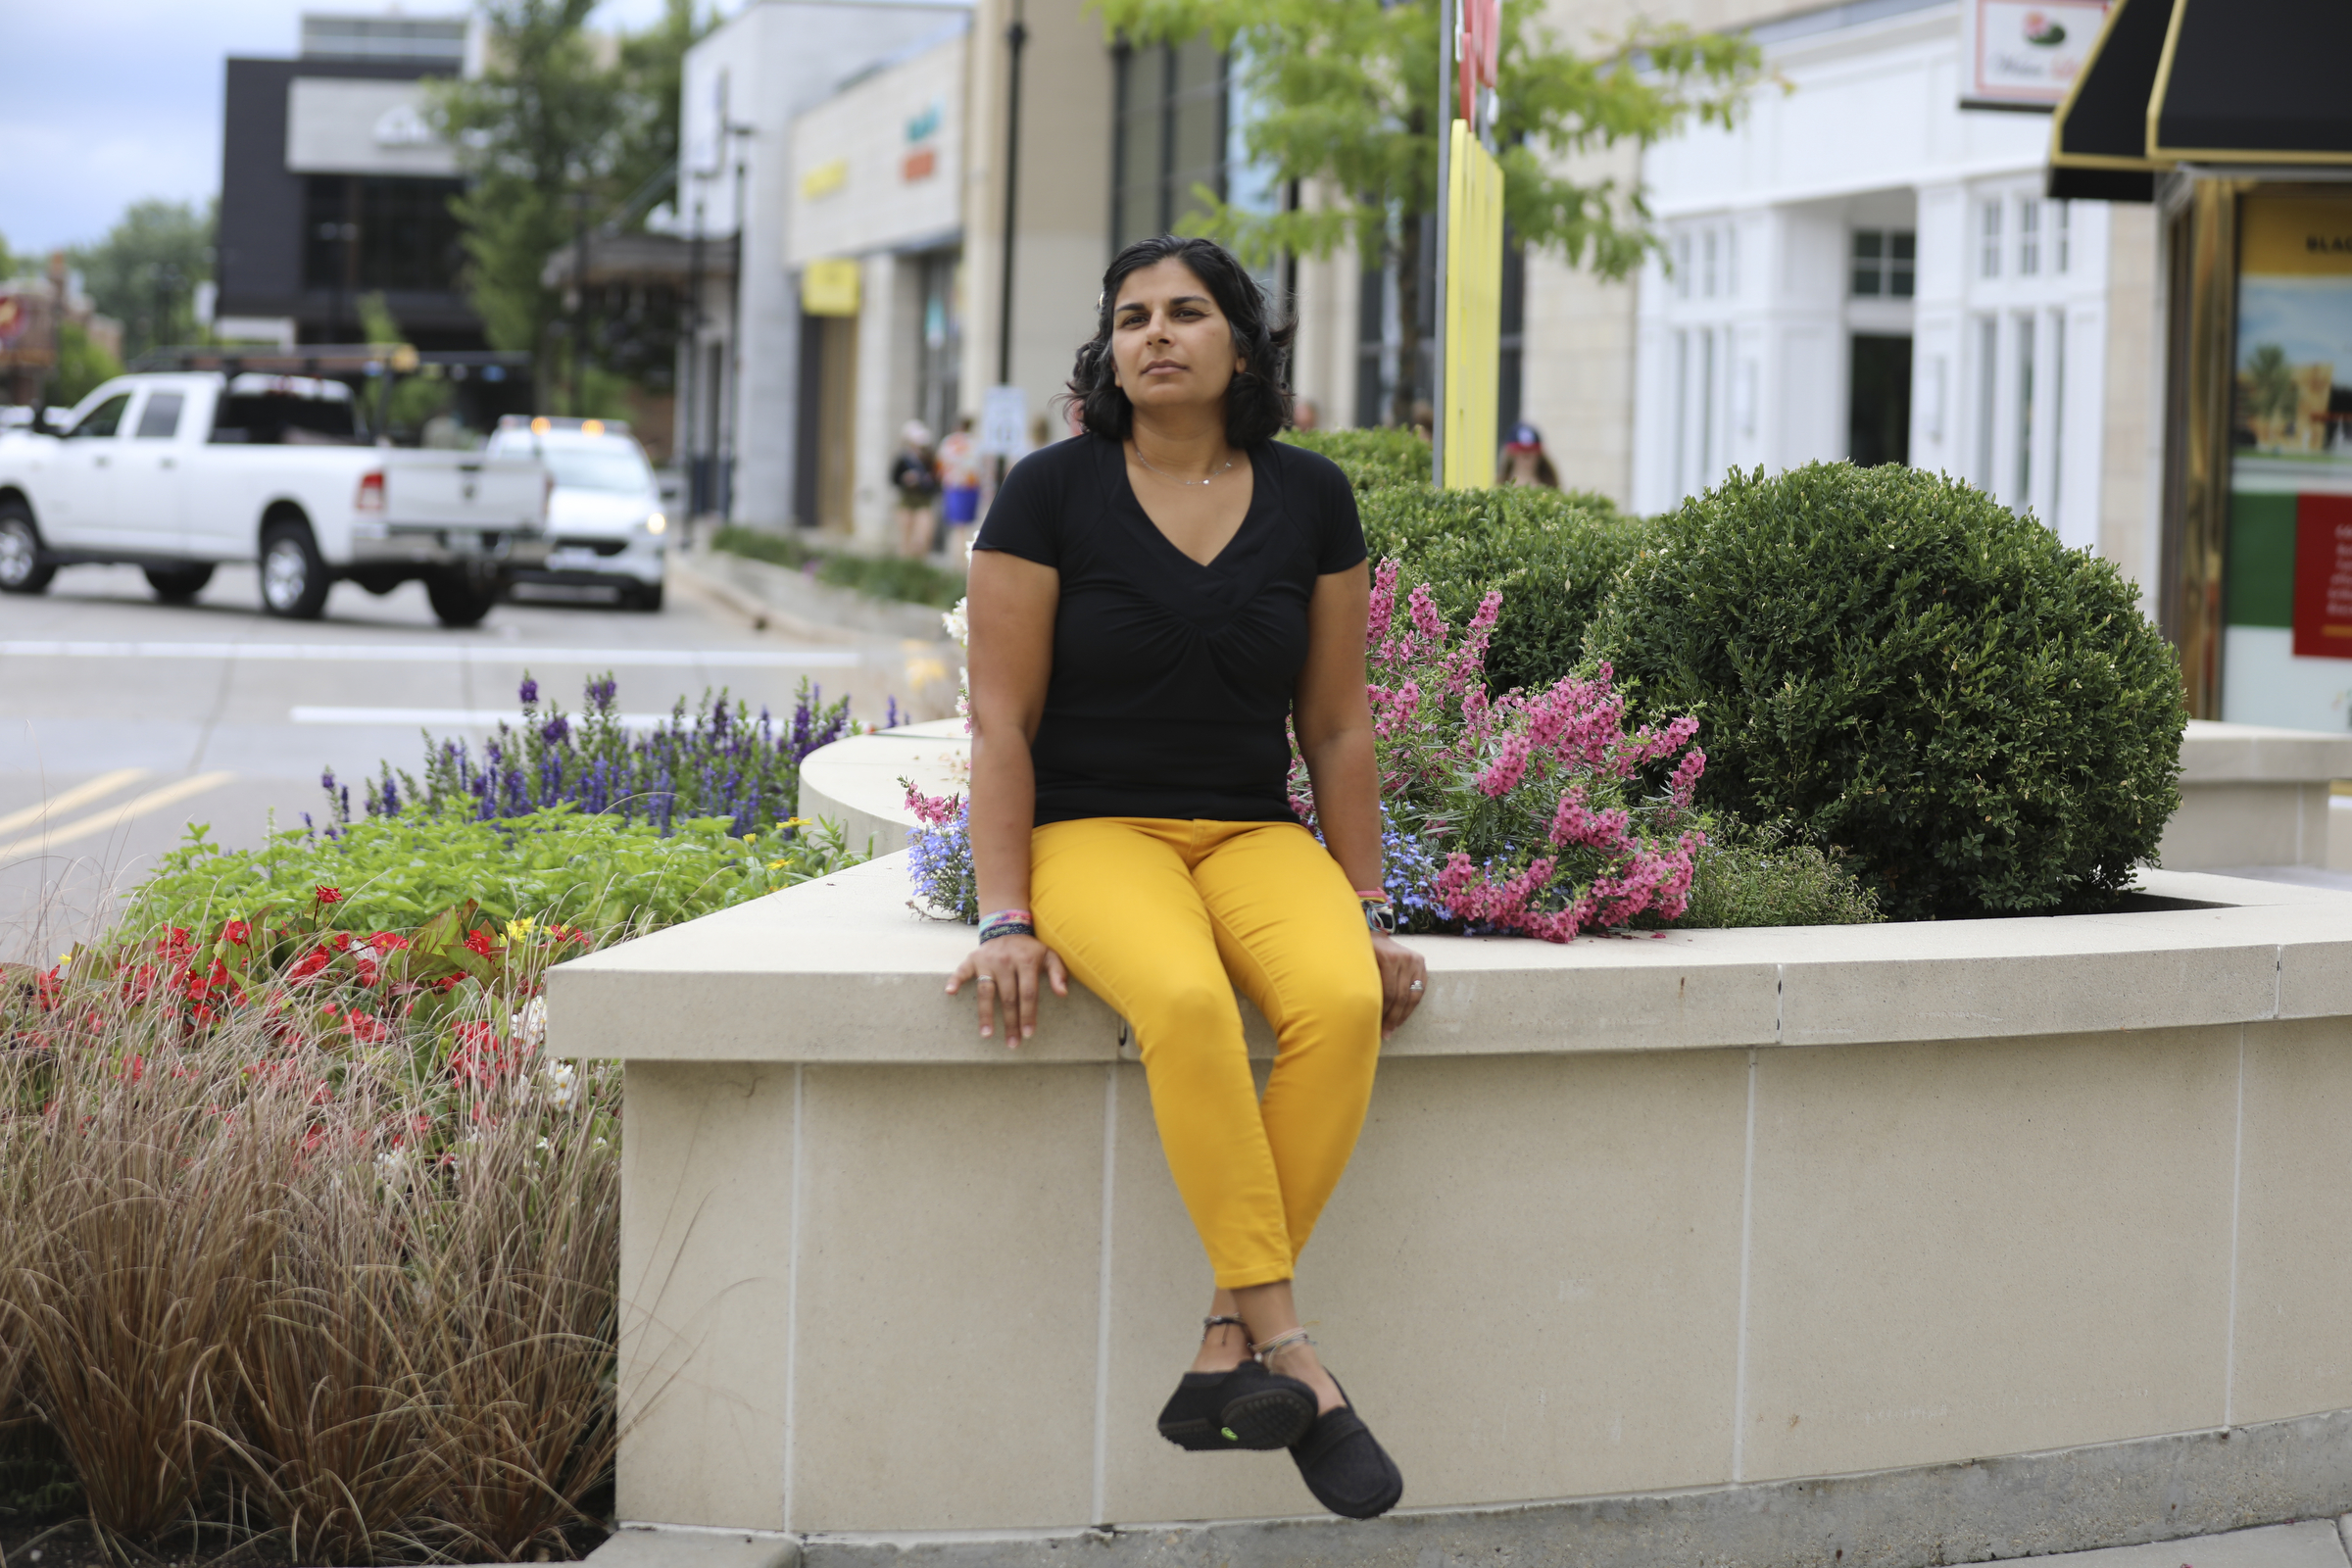 Dr. Shefaali Sharma, a Madison-based obstetrician and gynecologist, is photographed in Madison